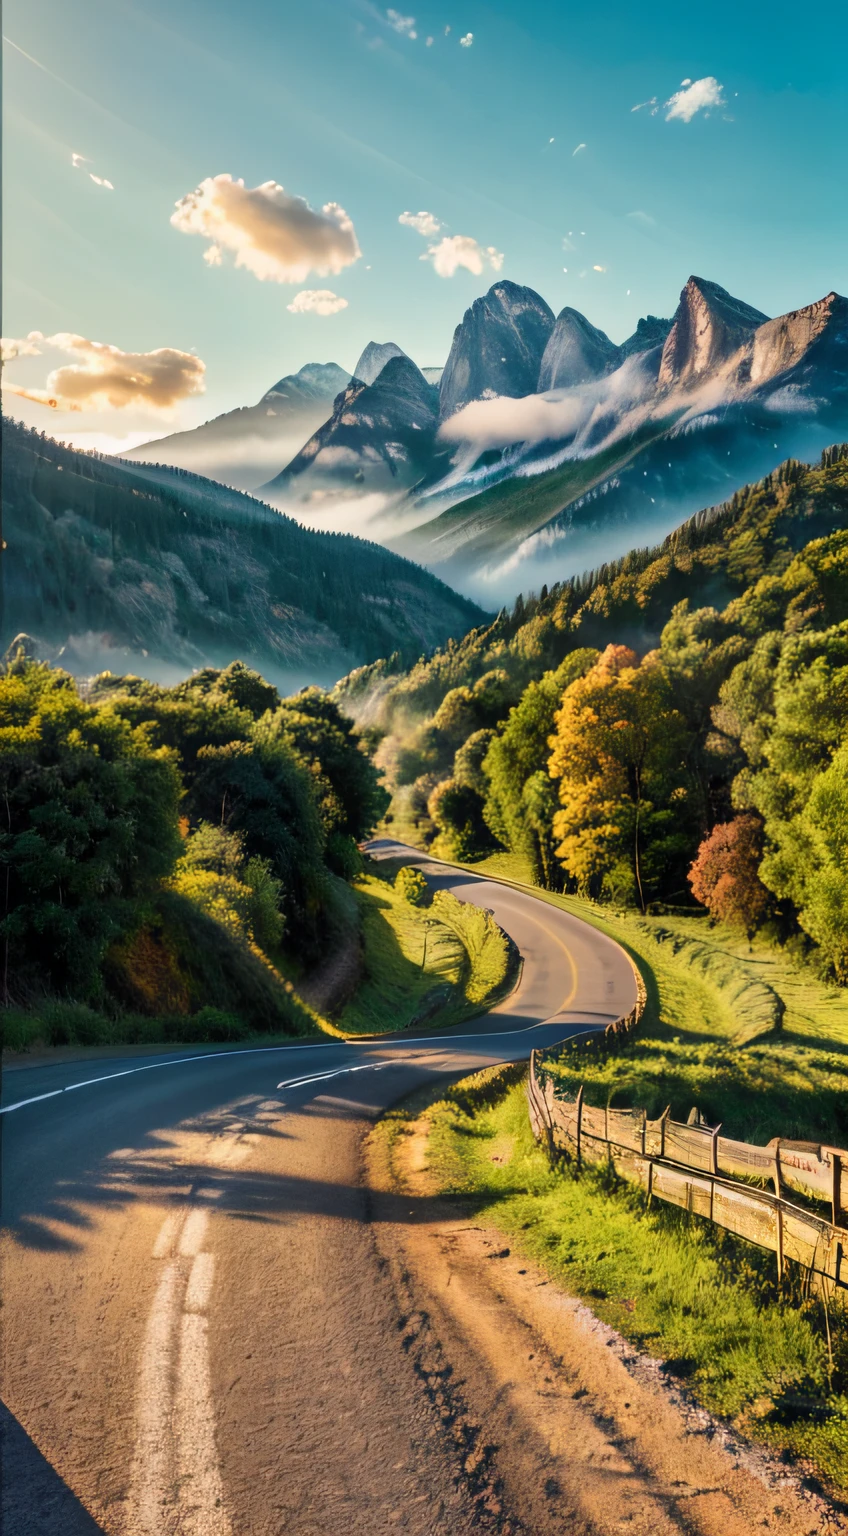 (best quality,4k,8k,highres,masterpiece:1.2),ultra-detailed,(realistic,photorealistic,photo-realistic:1.37),landscape,scenic view,serene atmosphere,nature,greenery,dreamlike,rays of sunlight,golden hour,peaceful,quiet,tranquil,country side,unpaved road,endless path,distance,exploration,adventure,beginning,new journey,unknown destination,wonder,,possibilities,lush trees,twisting and turning,mountains in the distance,warm colors,soft shadows,mild breeze,hopeful,fresh start,forward motion.